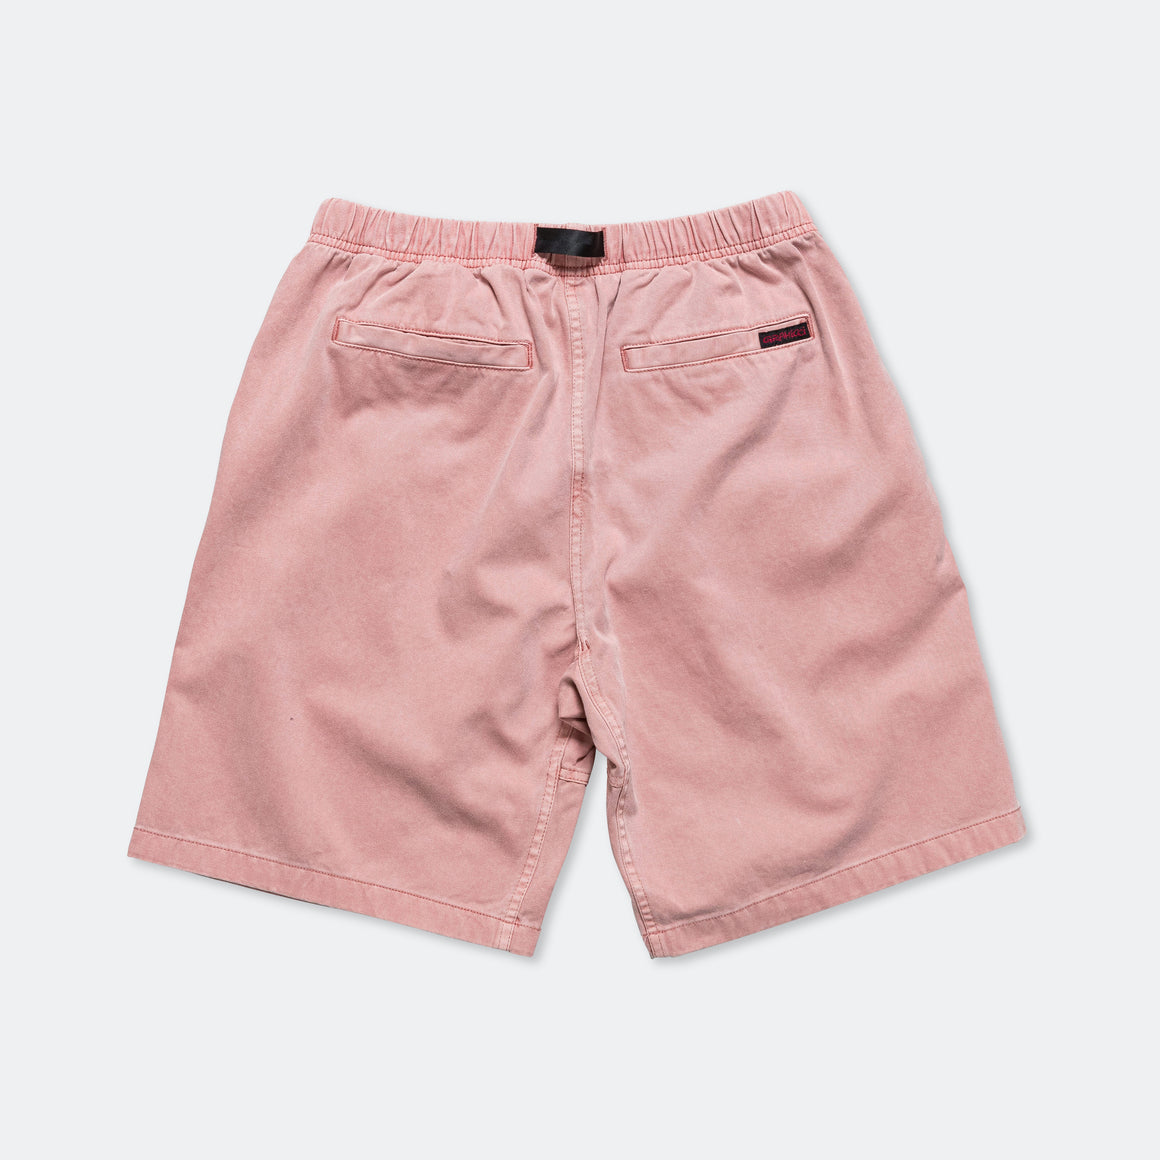 Gramicci - G-Short Pigement Dye - Coral - UP THERE